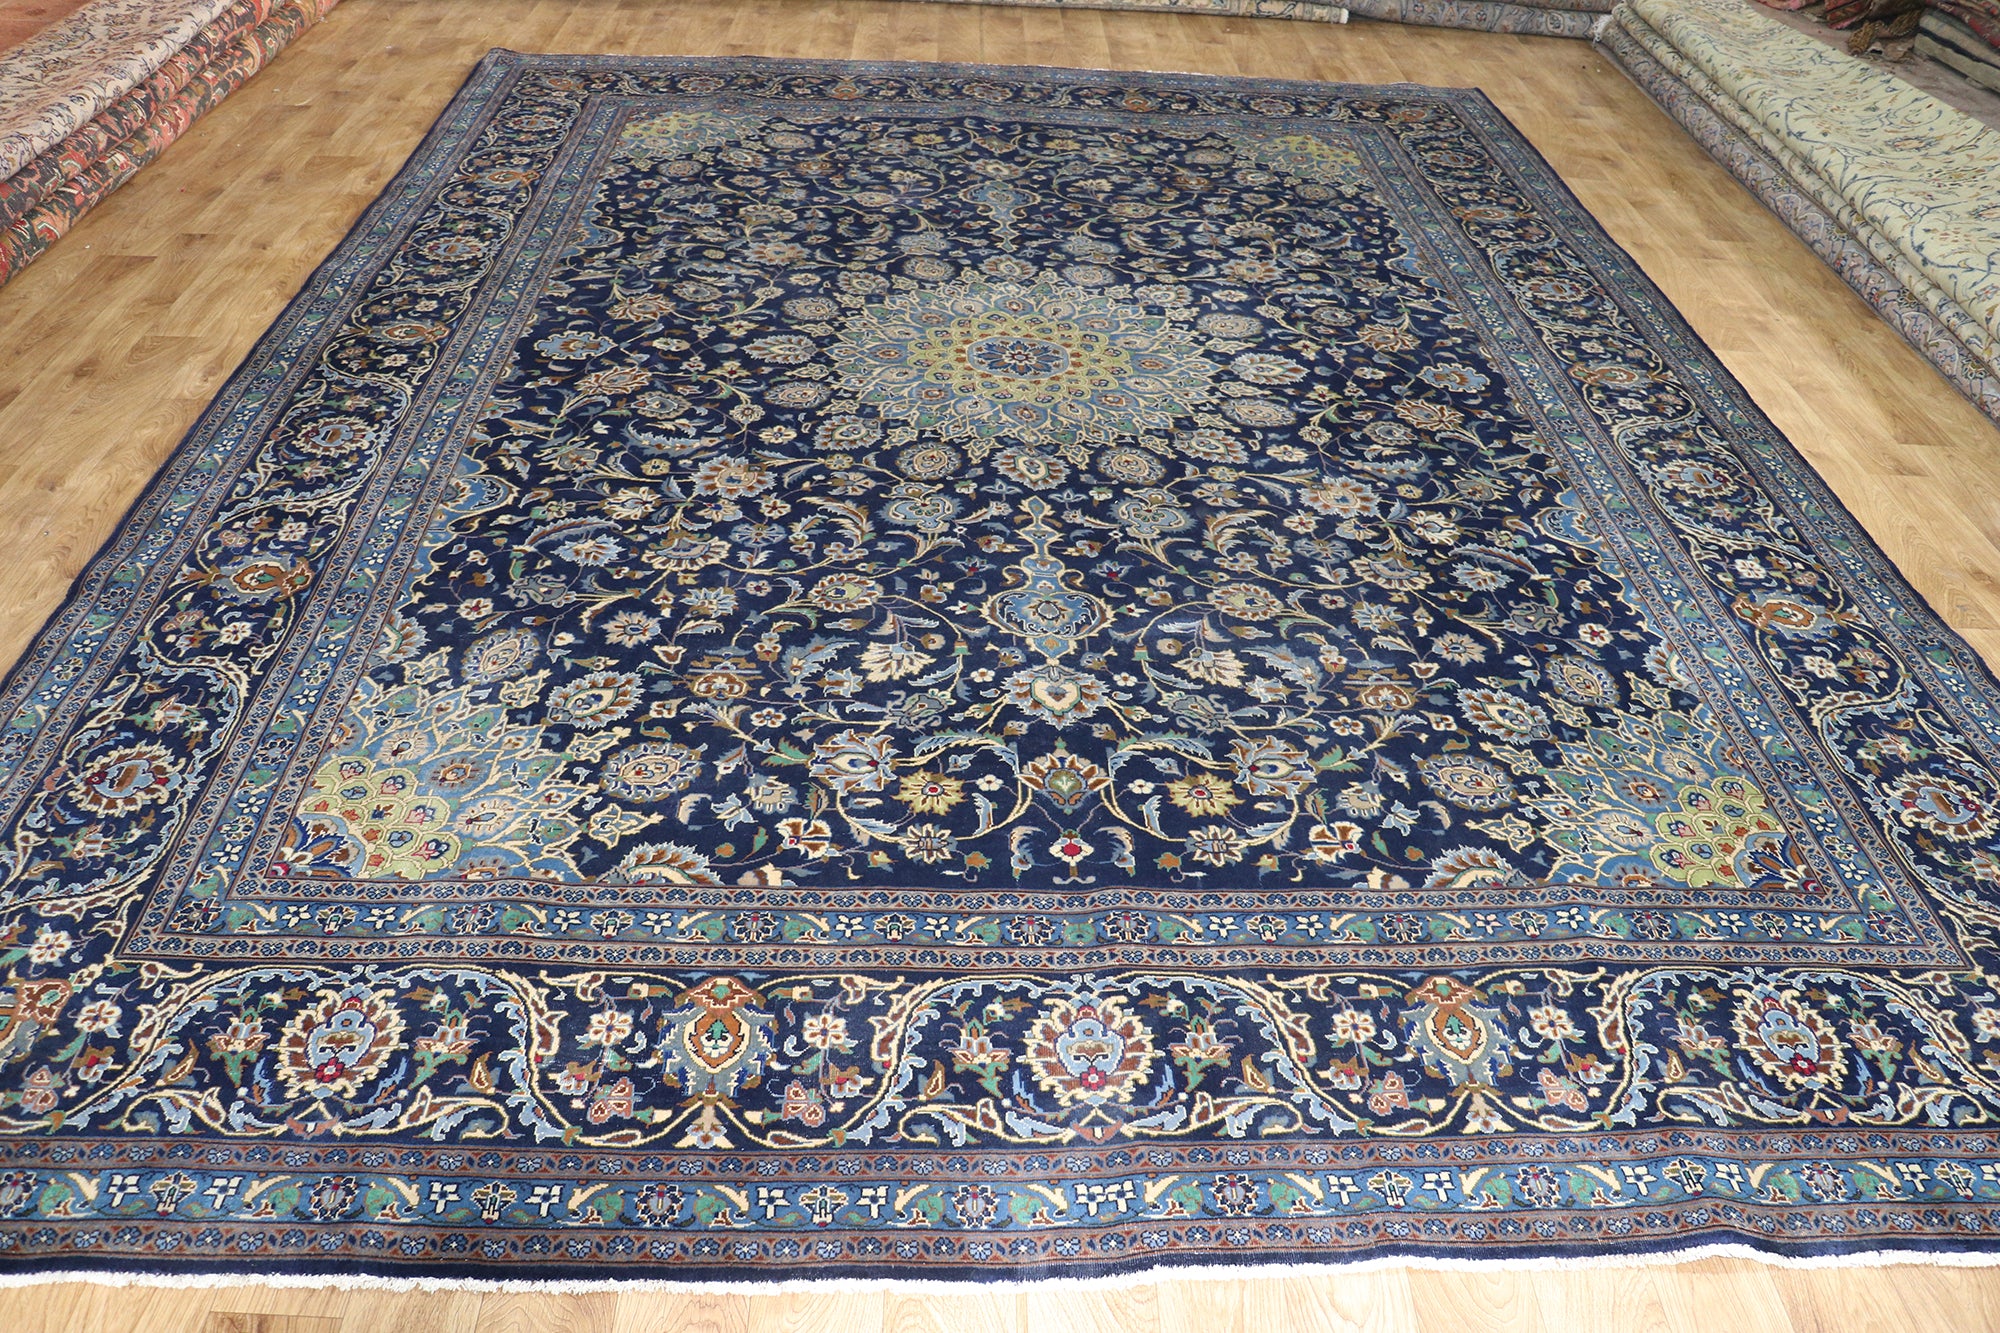 LARGE PERSIAN MASHAD CARPET WITH SUPERB COLOURS AND FLORAL DESIGN 380 X 290 CM